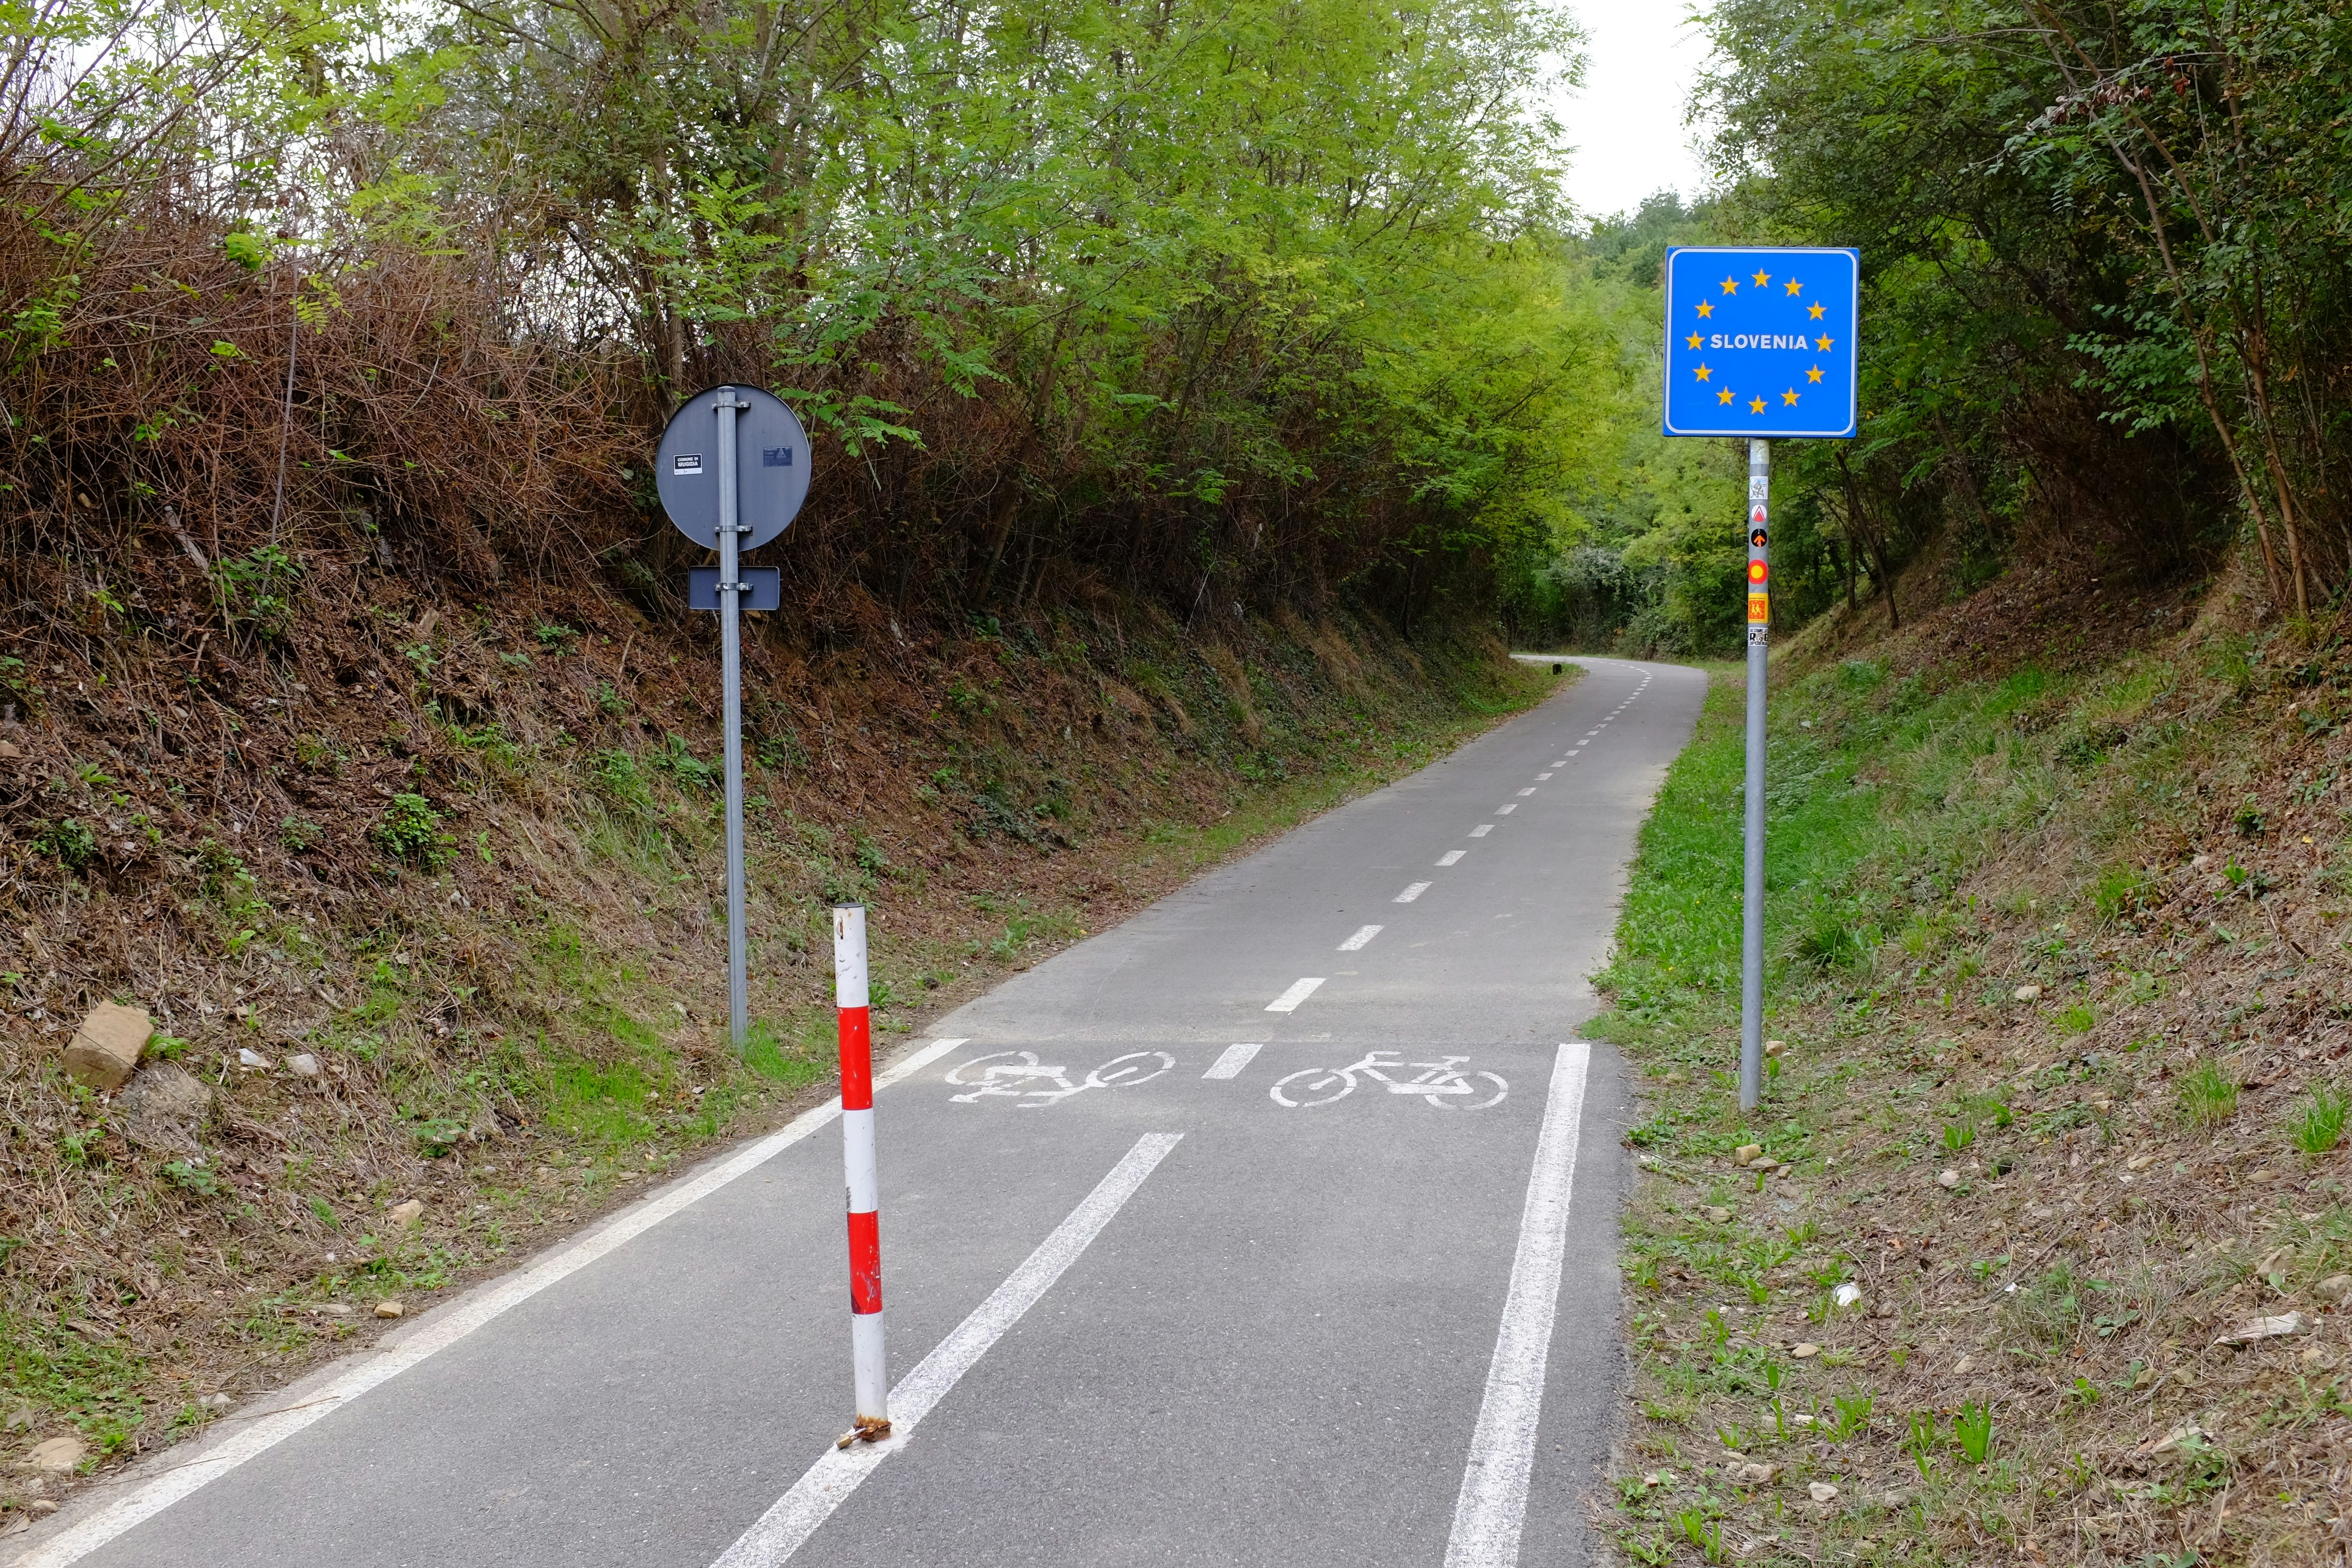 The border between Italy and Slovenia on the Parenzana Trail, which are two narrow lanes marked by white lines, bicycle traffic logos and  a blue sign facing the viewer with the blue field and yellow stars of the European Union